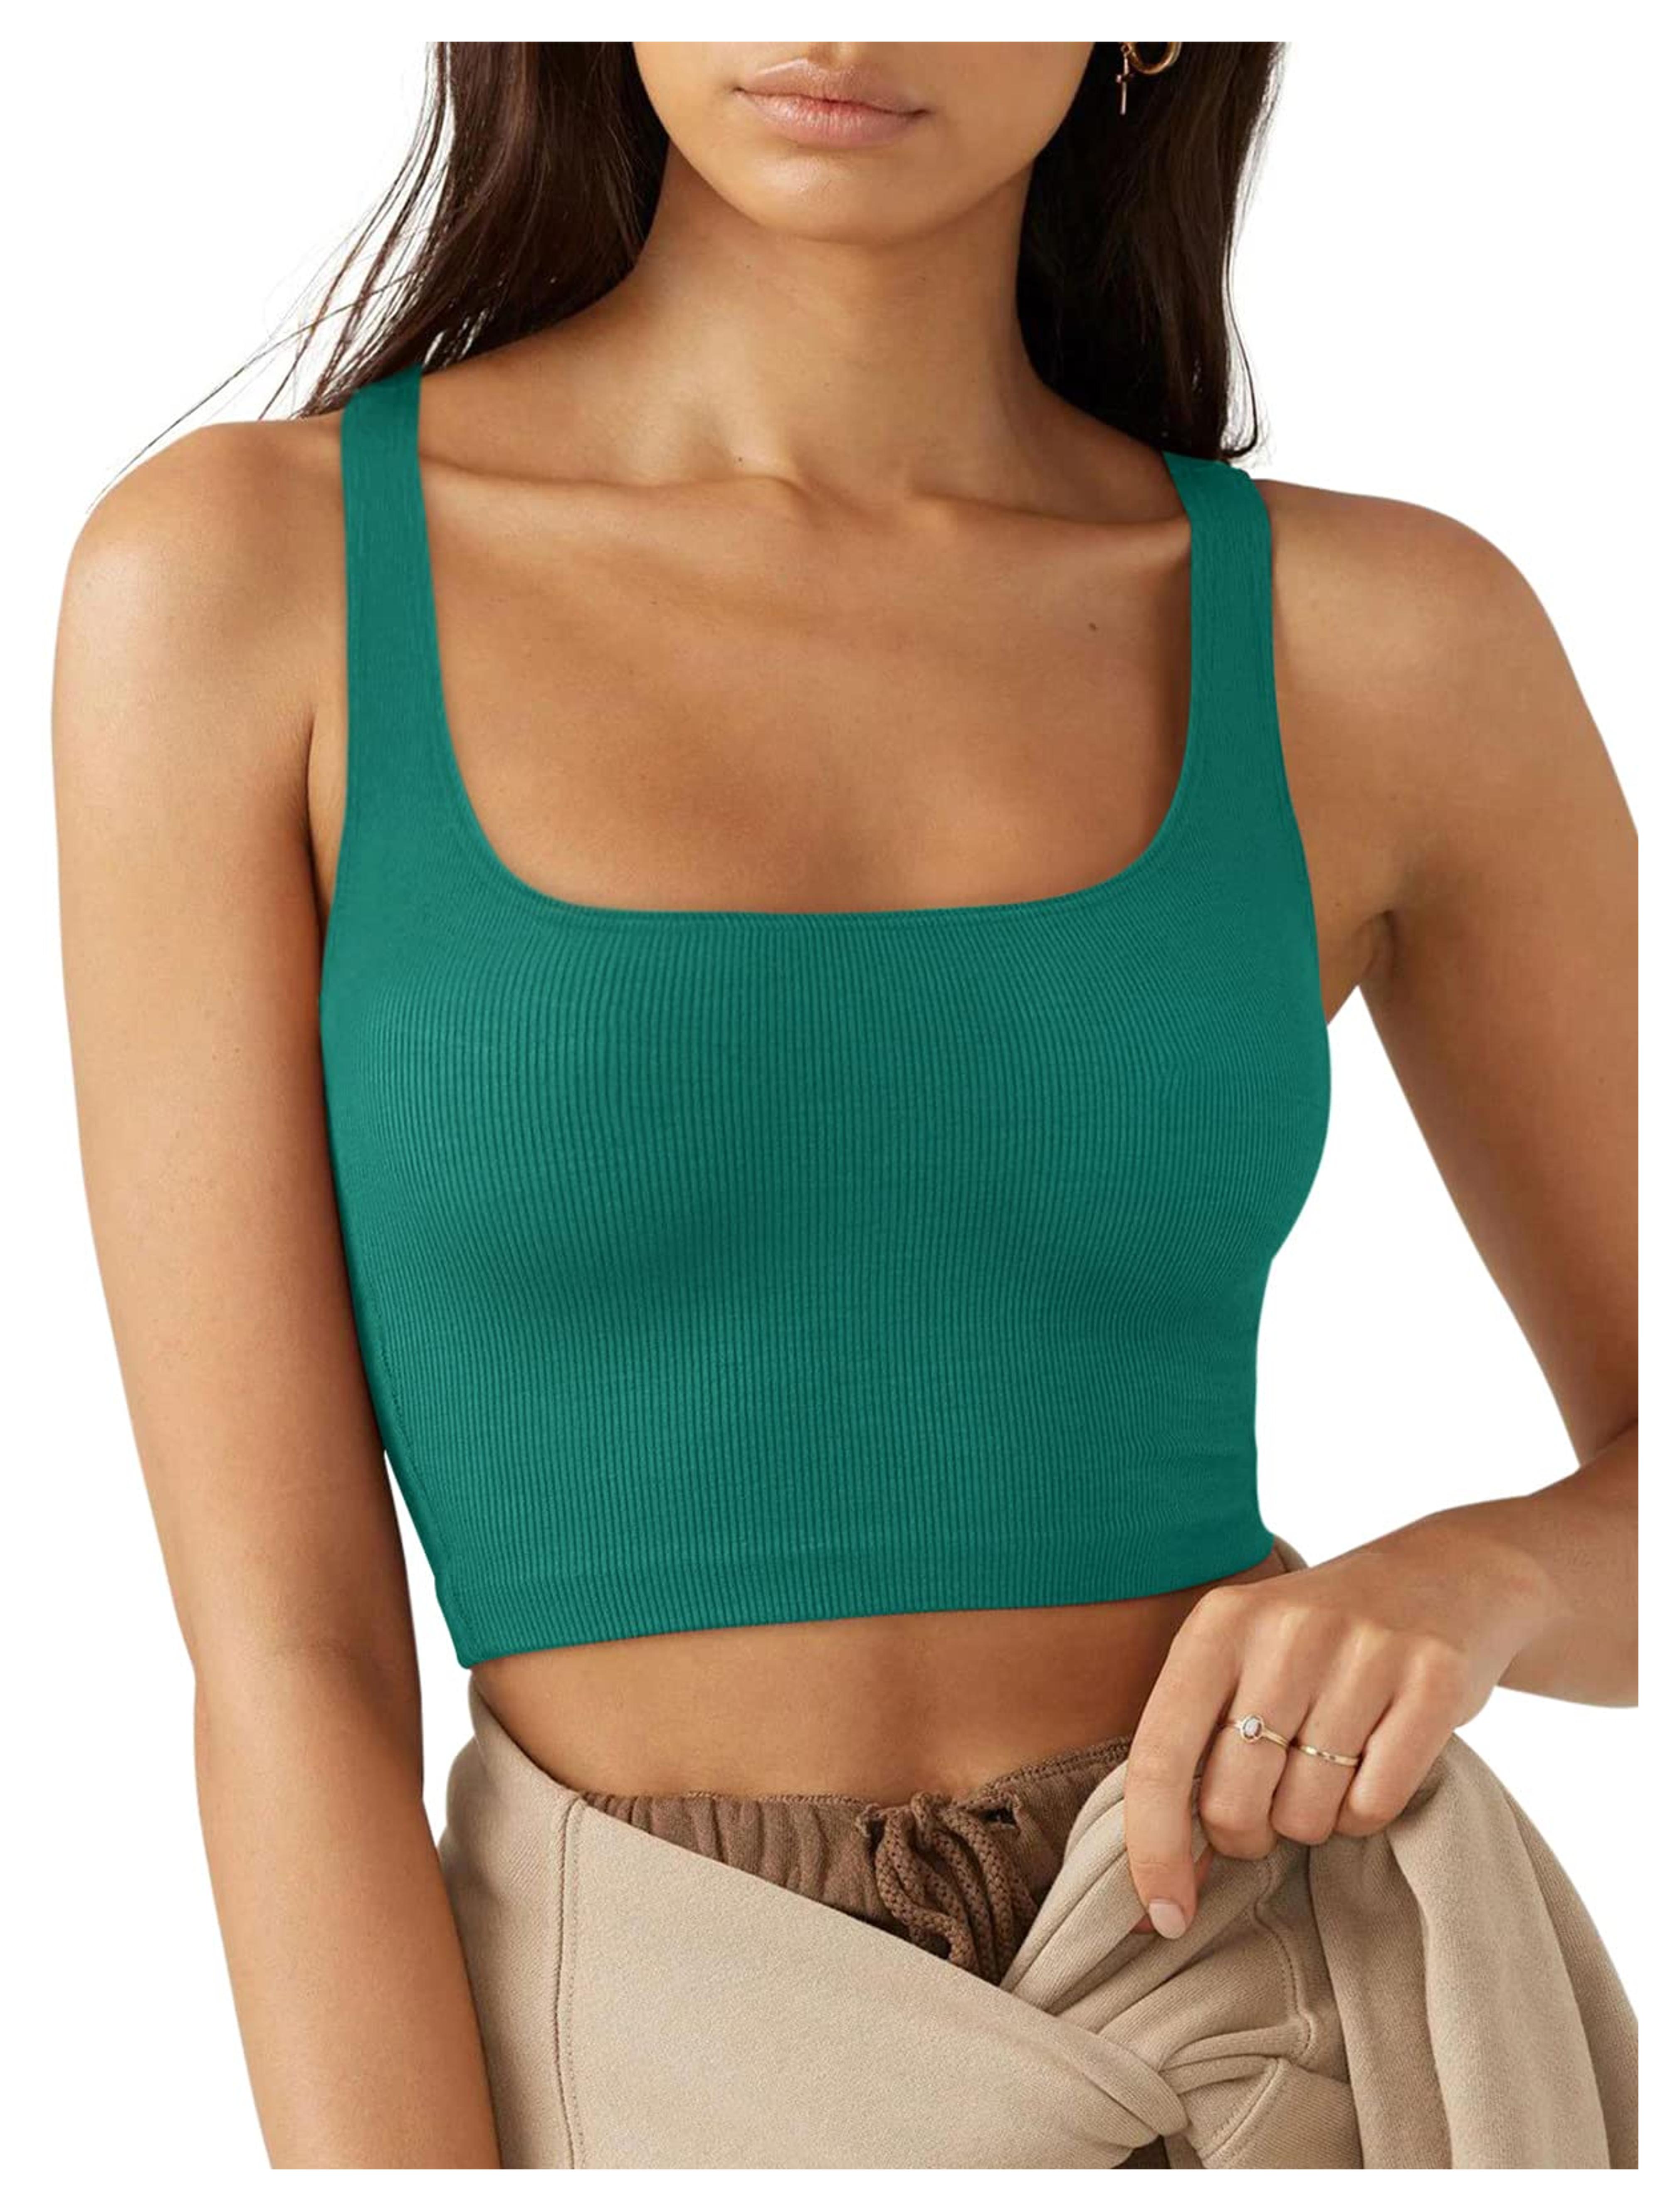 LASLULU Women Summer Sexy Sleeveless Square Neck Fitted Knit Ribbed Cropped Tank Tops Cute Workout Yoga Gym Crop Tops(Aqua Green Medium) at Amazon Women’s Clothing store